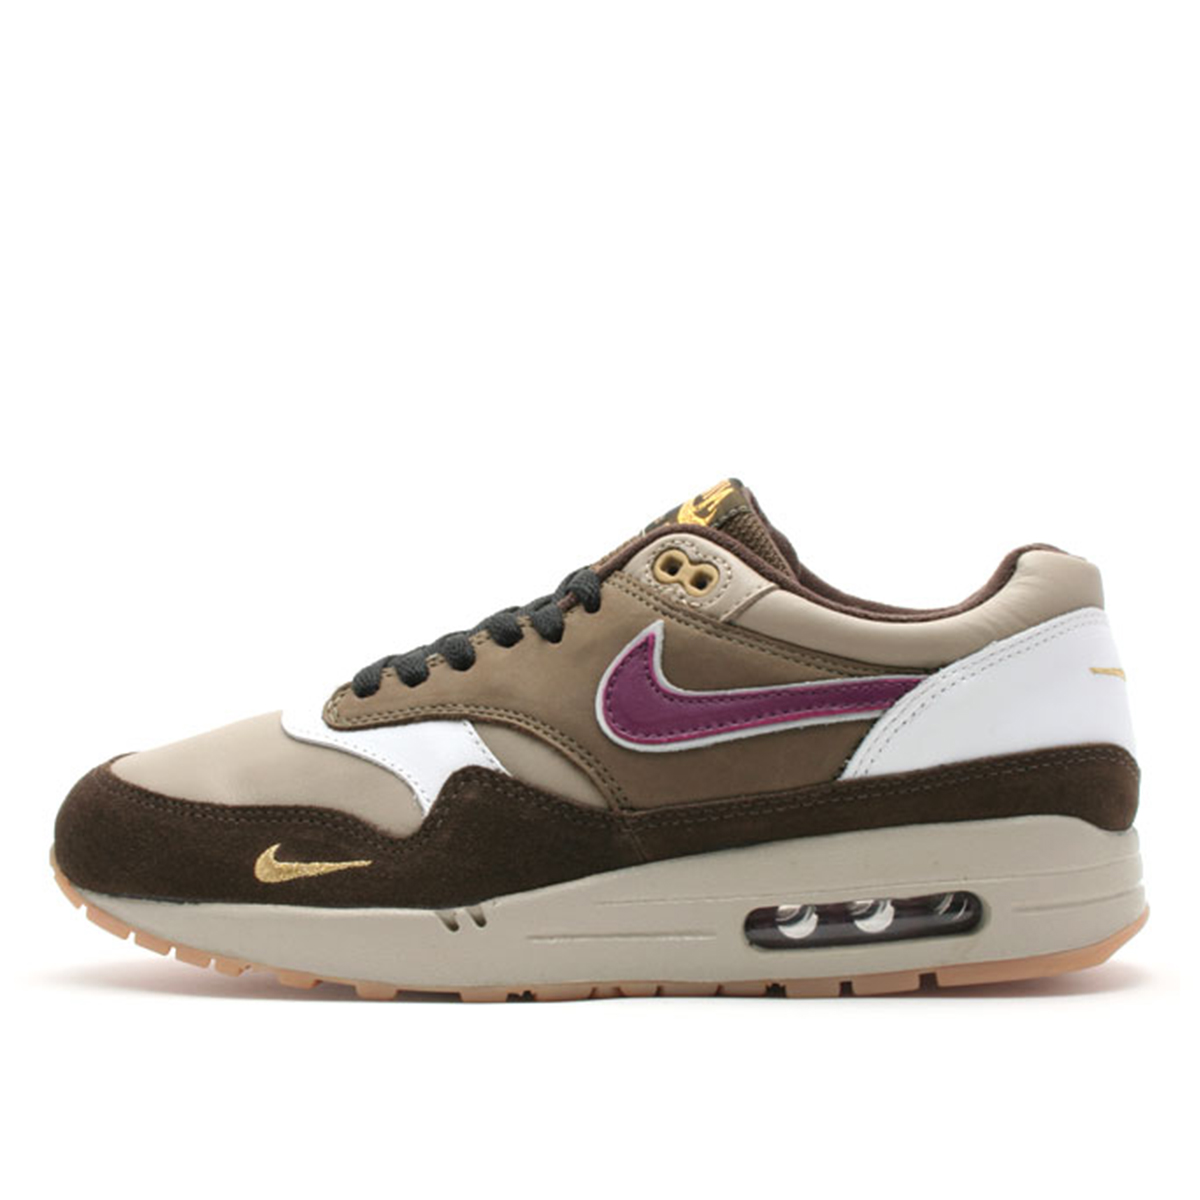 Where to Buy and Sell Nike Air Max 1 Atmos Viotech | 302740-251